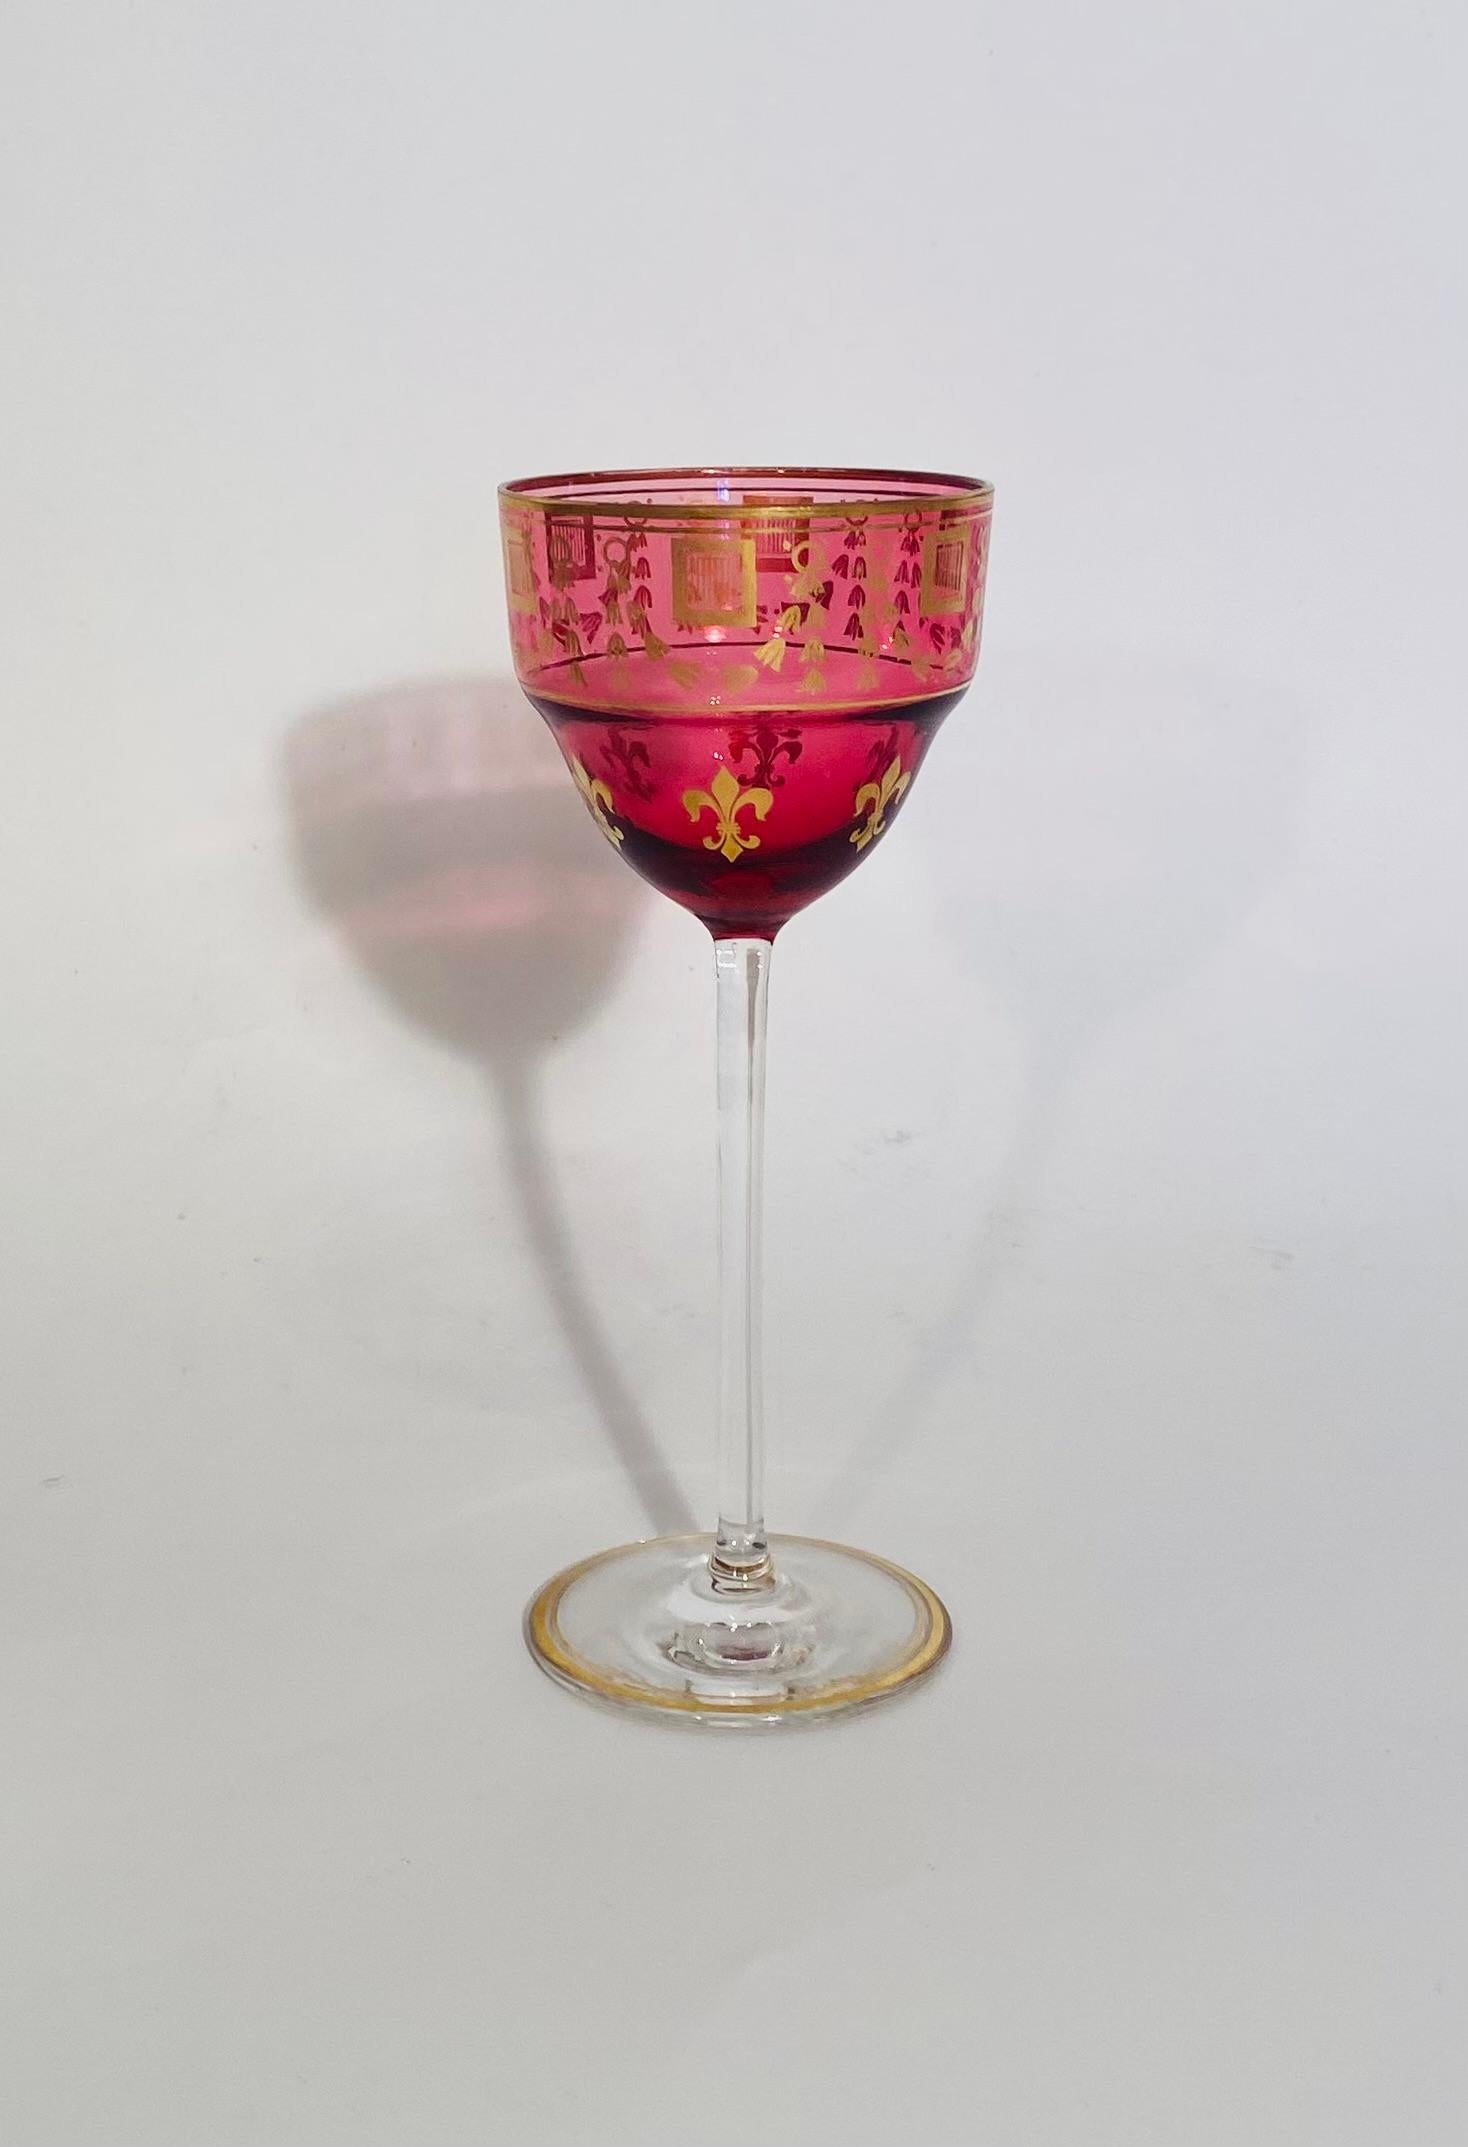 A vibrant set of ruby red and interesting gilt wine goblets featuring a fleur de lis design. Nice and tall and in very good antique condition. We attribute to one of the finer French crystalleries of Baccarat or Saint Louis. 